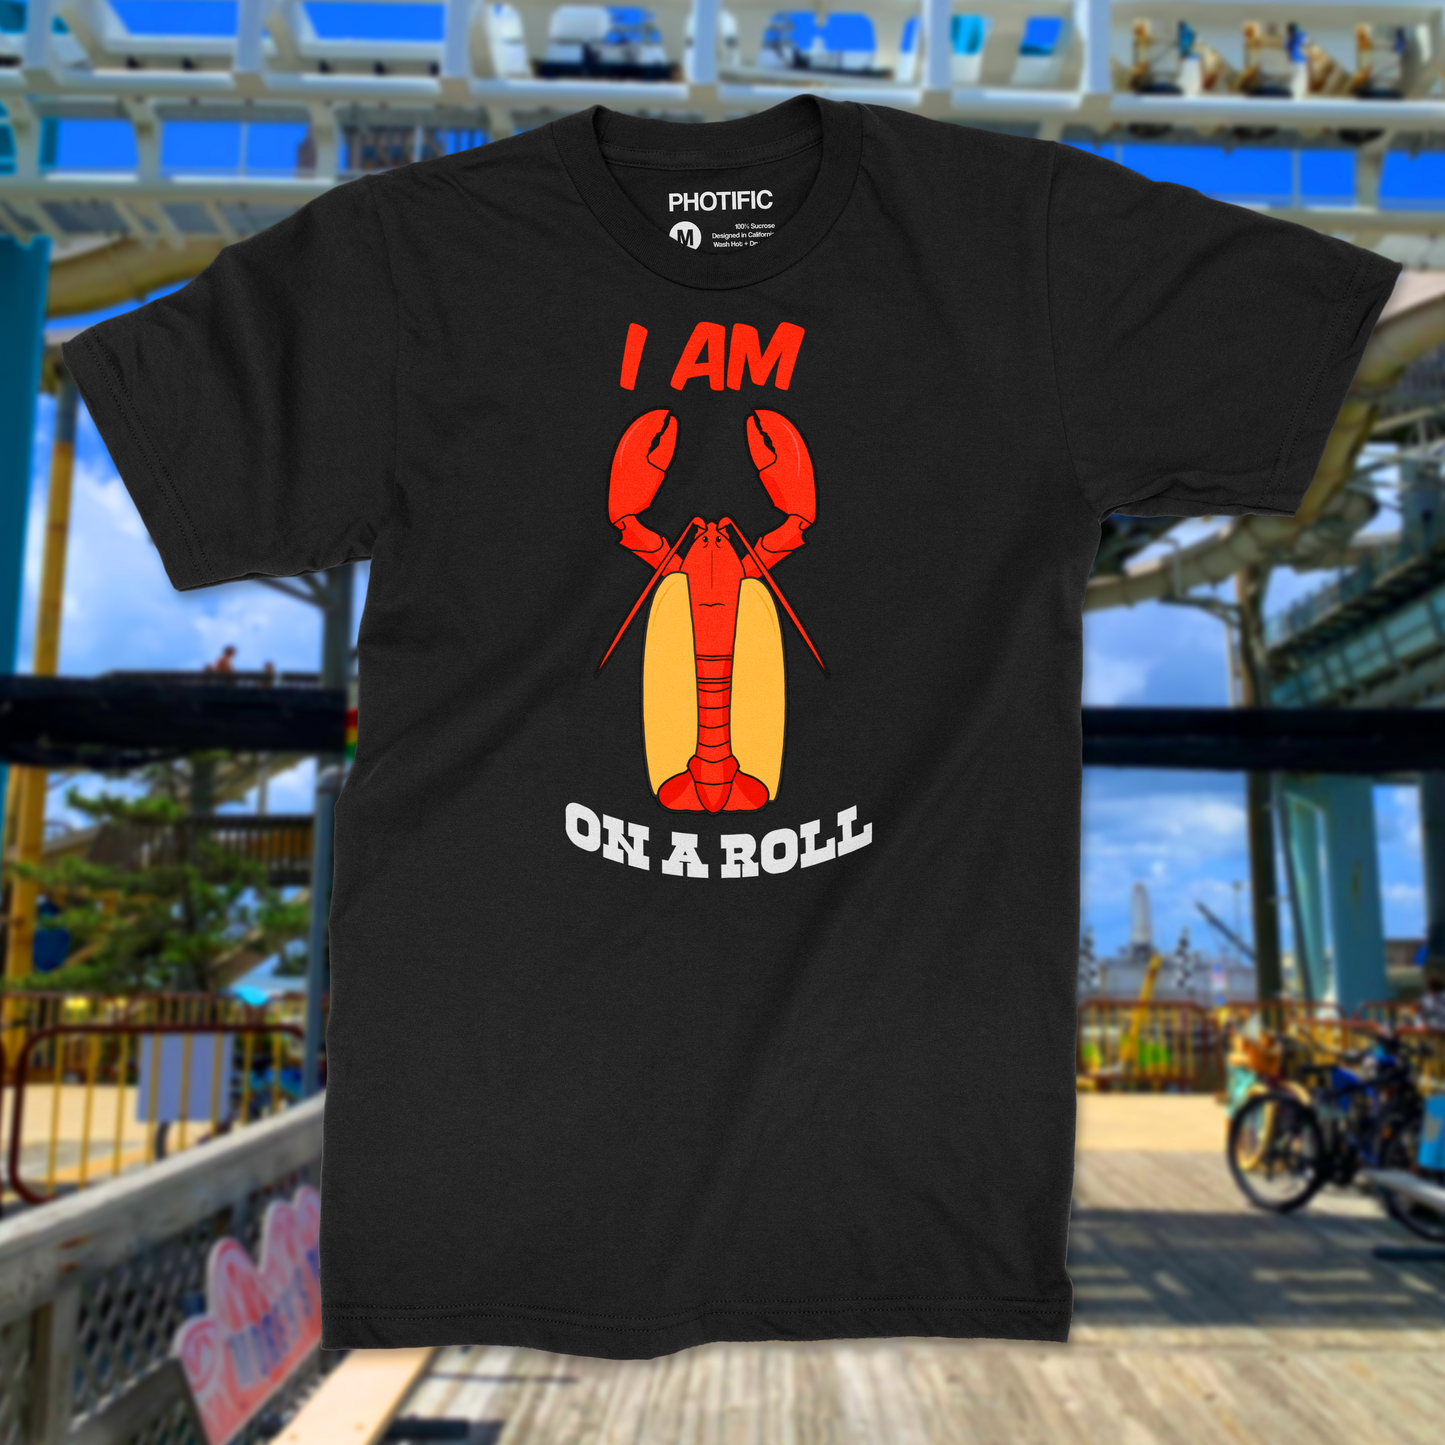 I'm on a ROLL Funny Lobster shirt